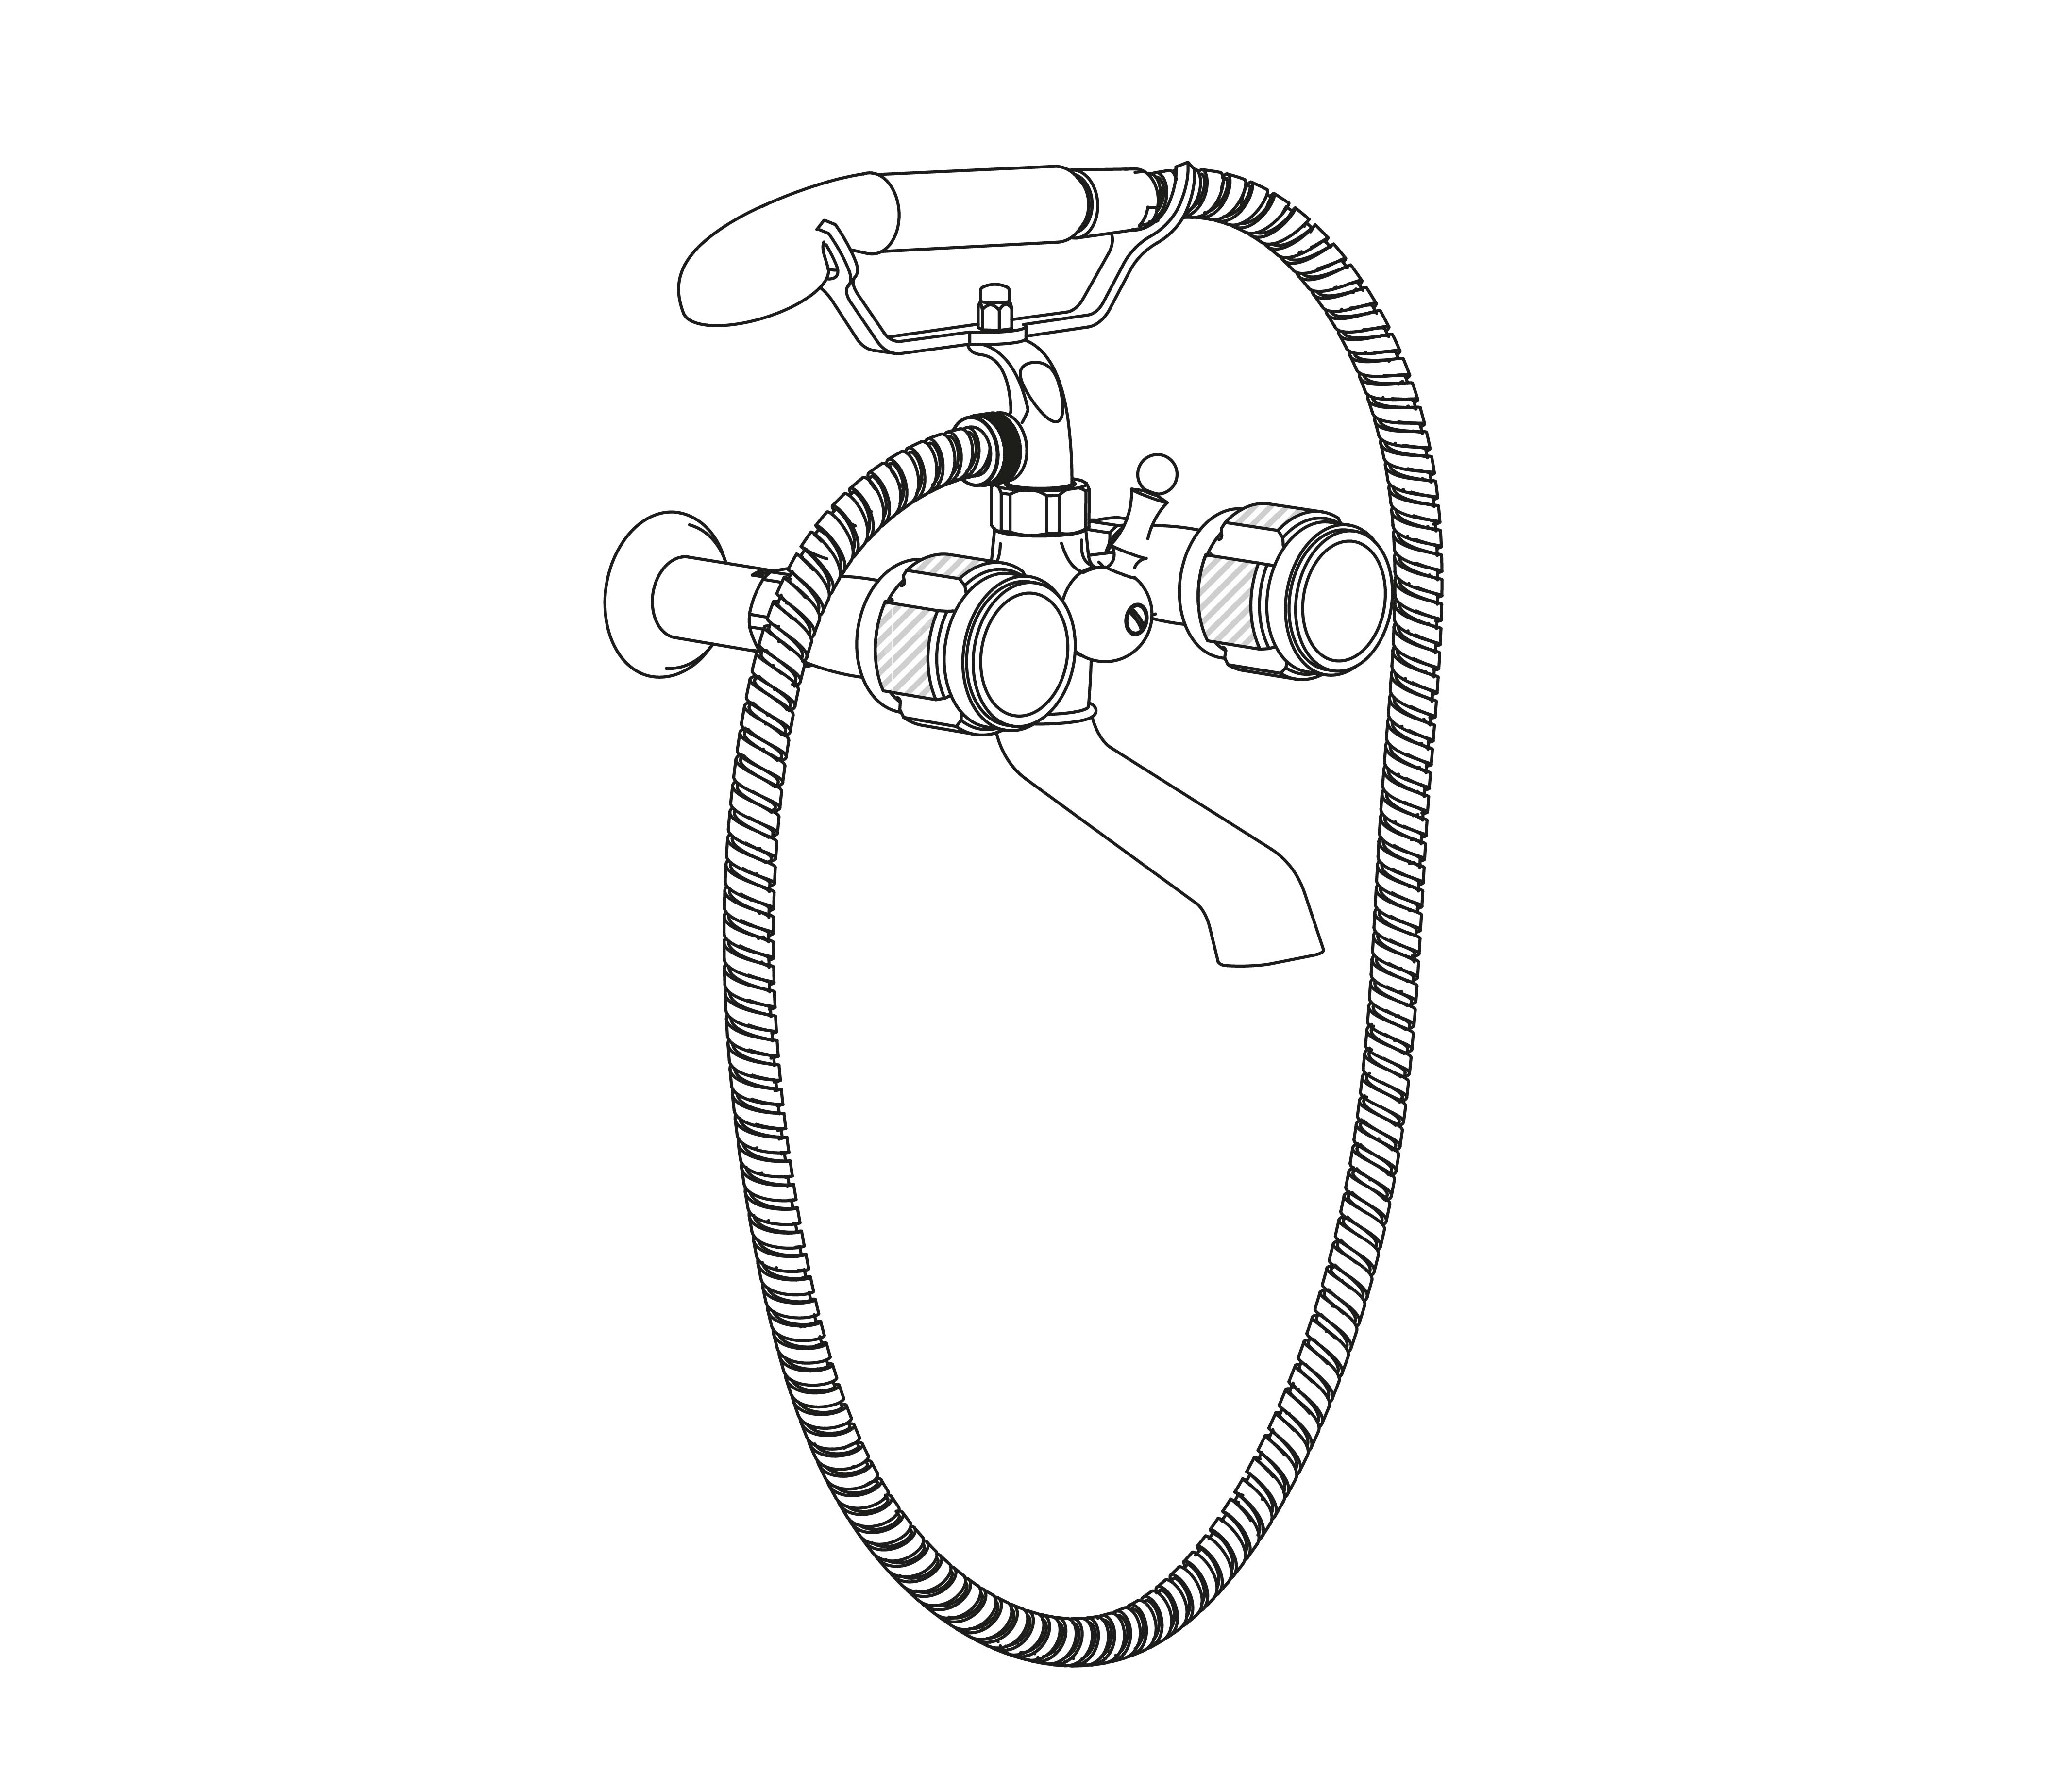 S84-3201 Wall mounted bath and shower mixer